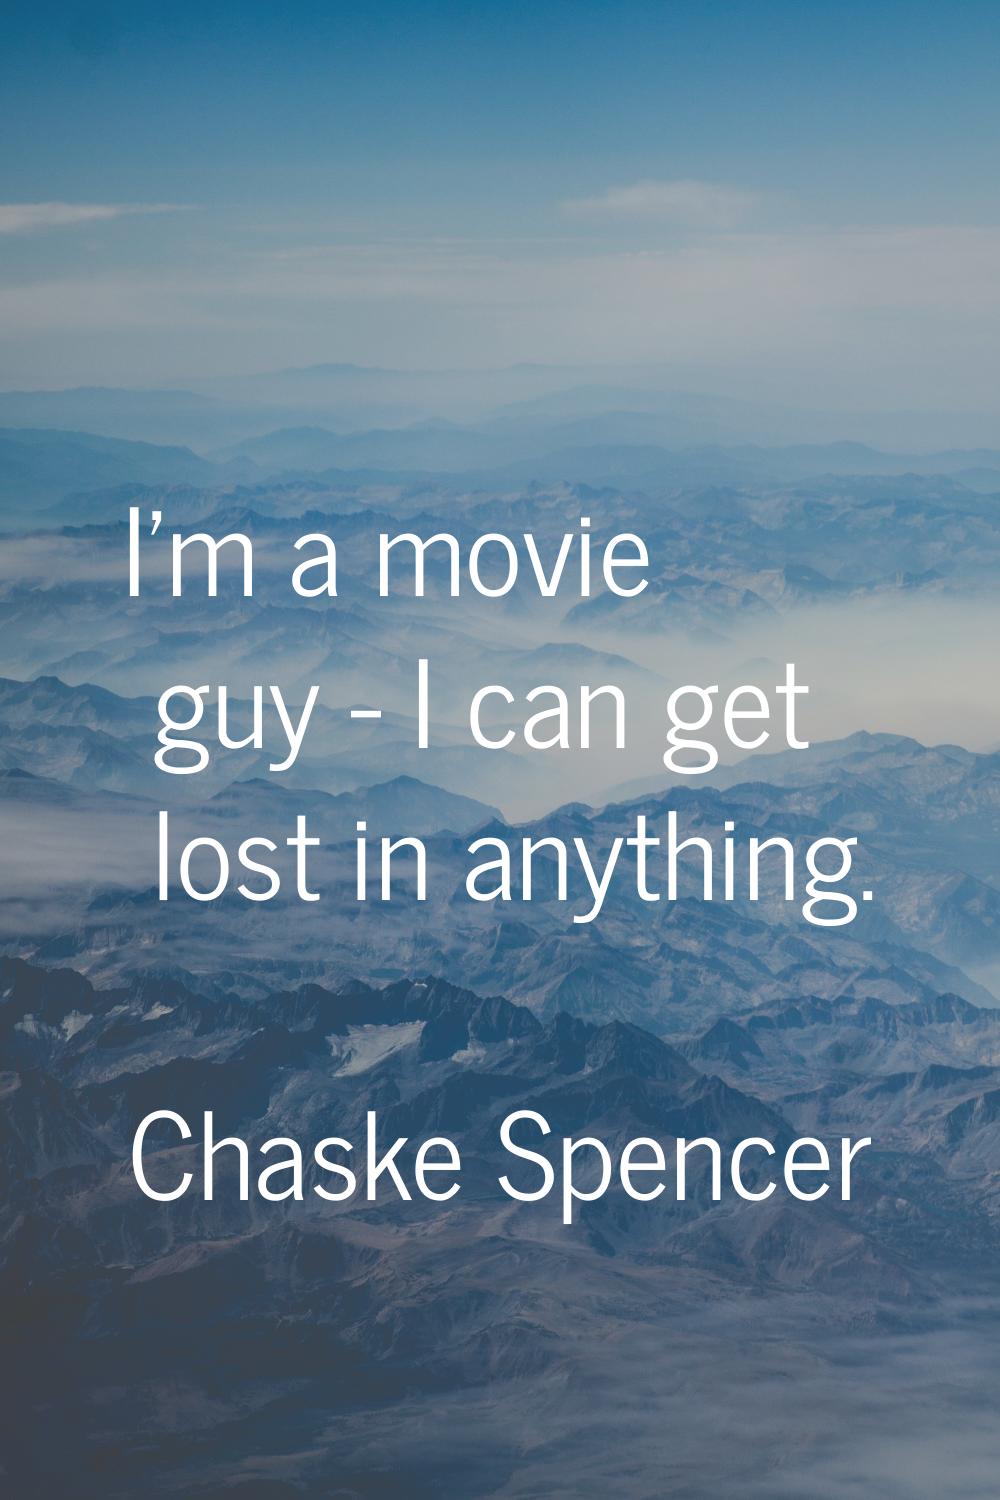 I'm a movie guy - I can get lost in anything.